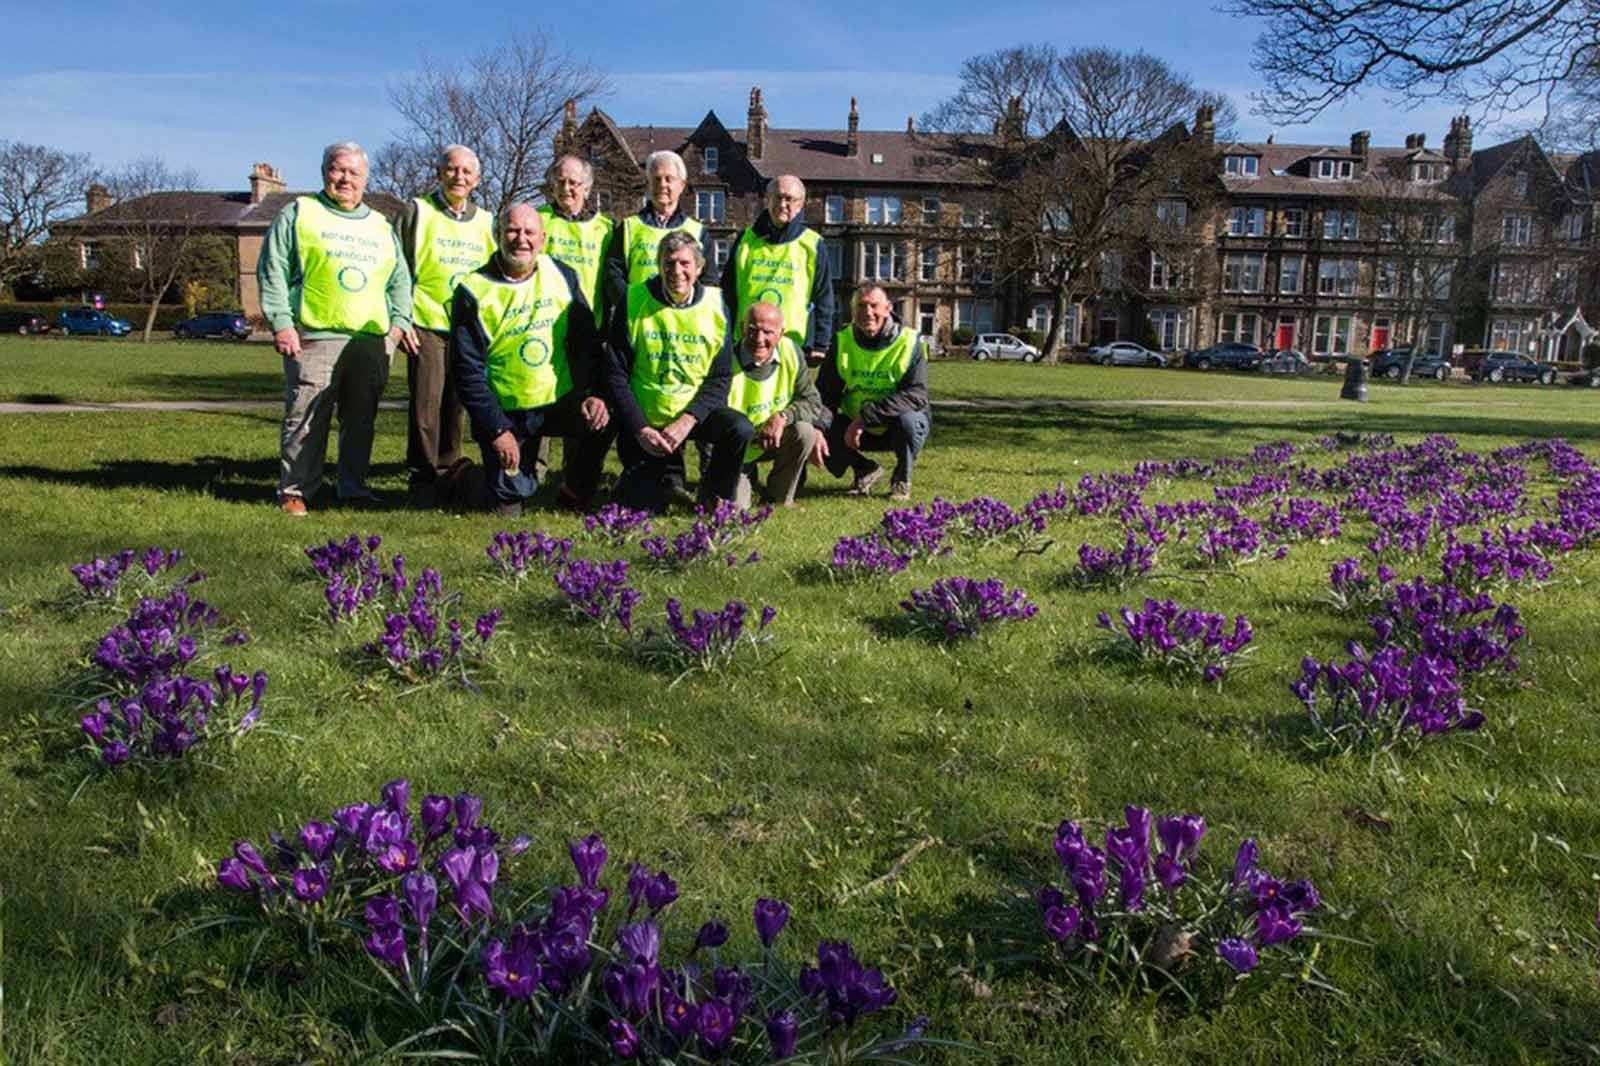 Members of the Rotary Club of Harrogate see how their Purple4Polio planting has turned out on the Granby Stray